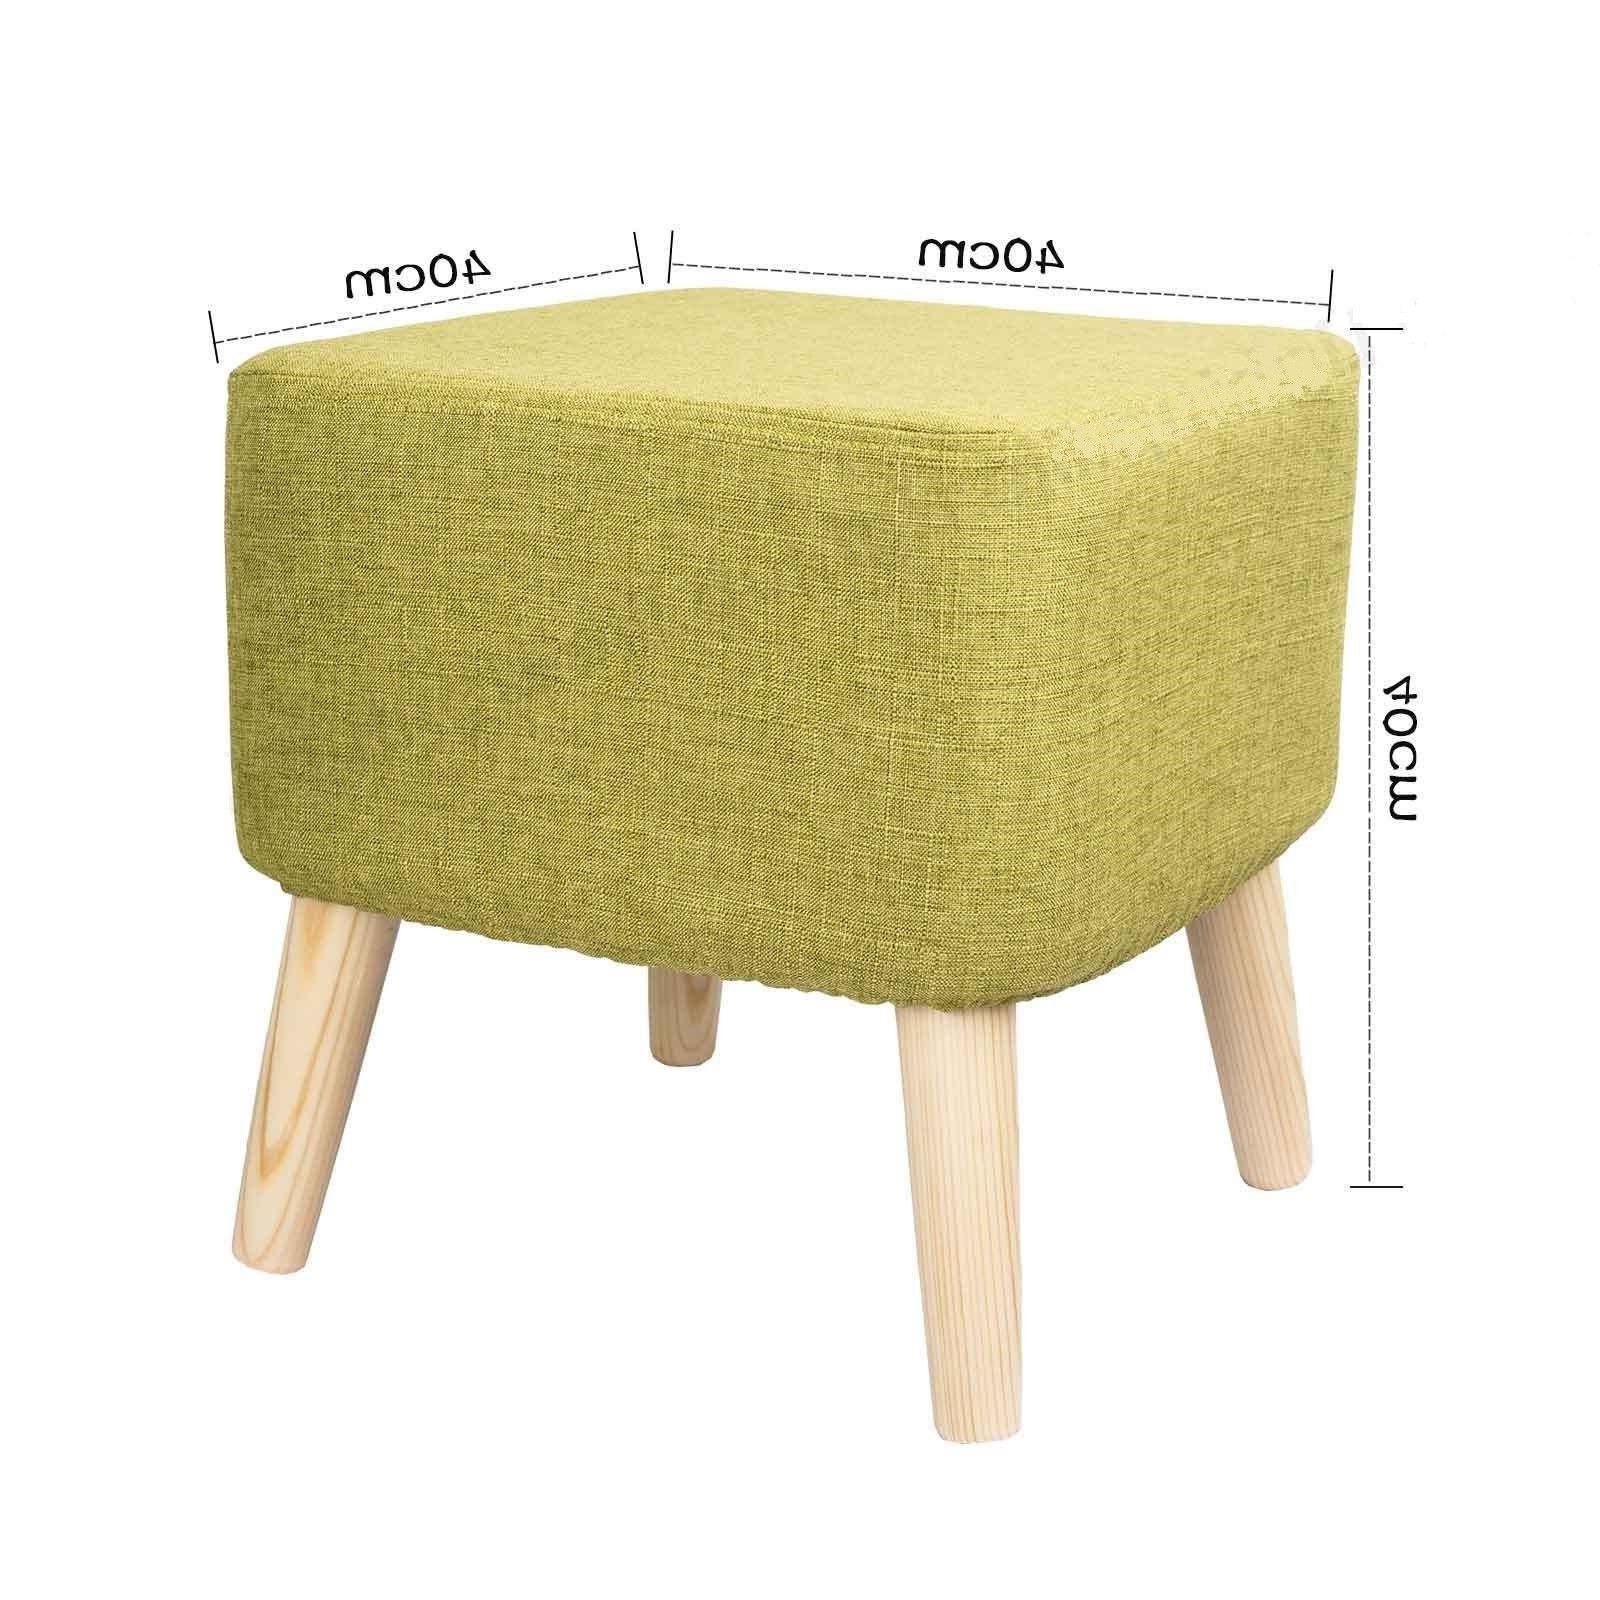 Modern Coloured Upholstered Footstool Ottoman Pouffe Stool Wooden 4 With Recent Wooden Legs Ottomans (View 9 of 10)